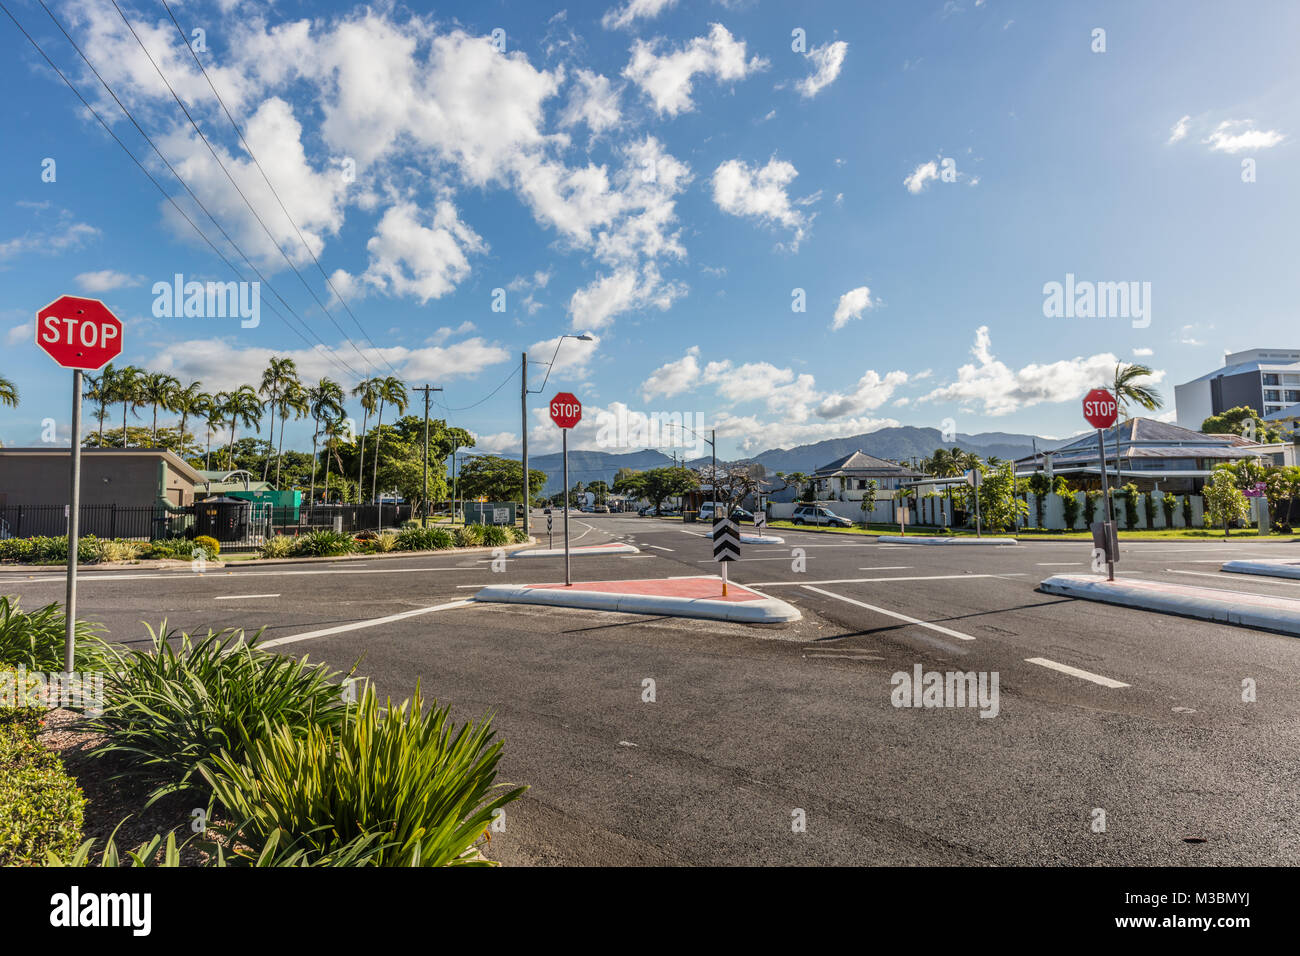 Streets of Cairns: roads, traffic signs, buildings. Queensland, Australia Stock Photo